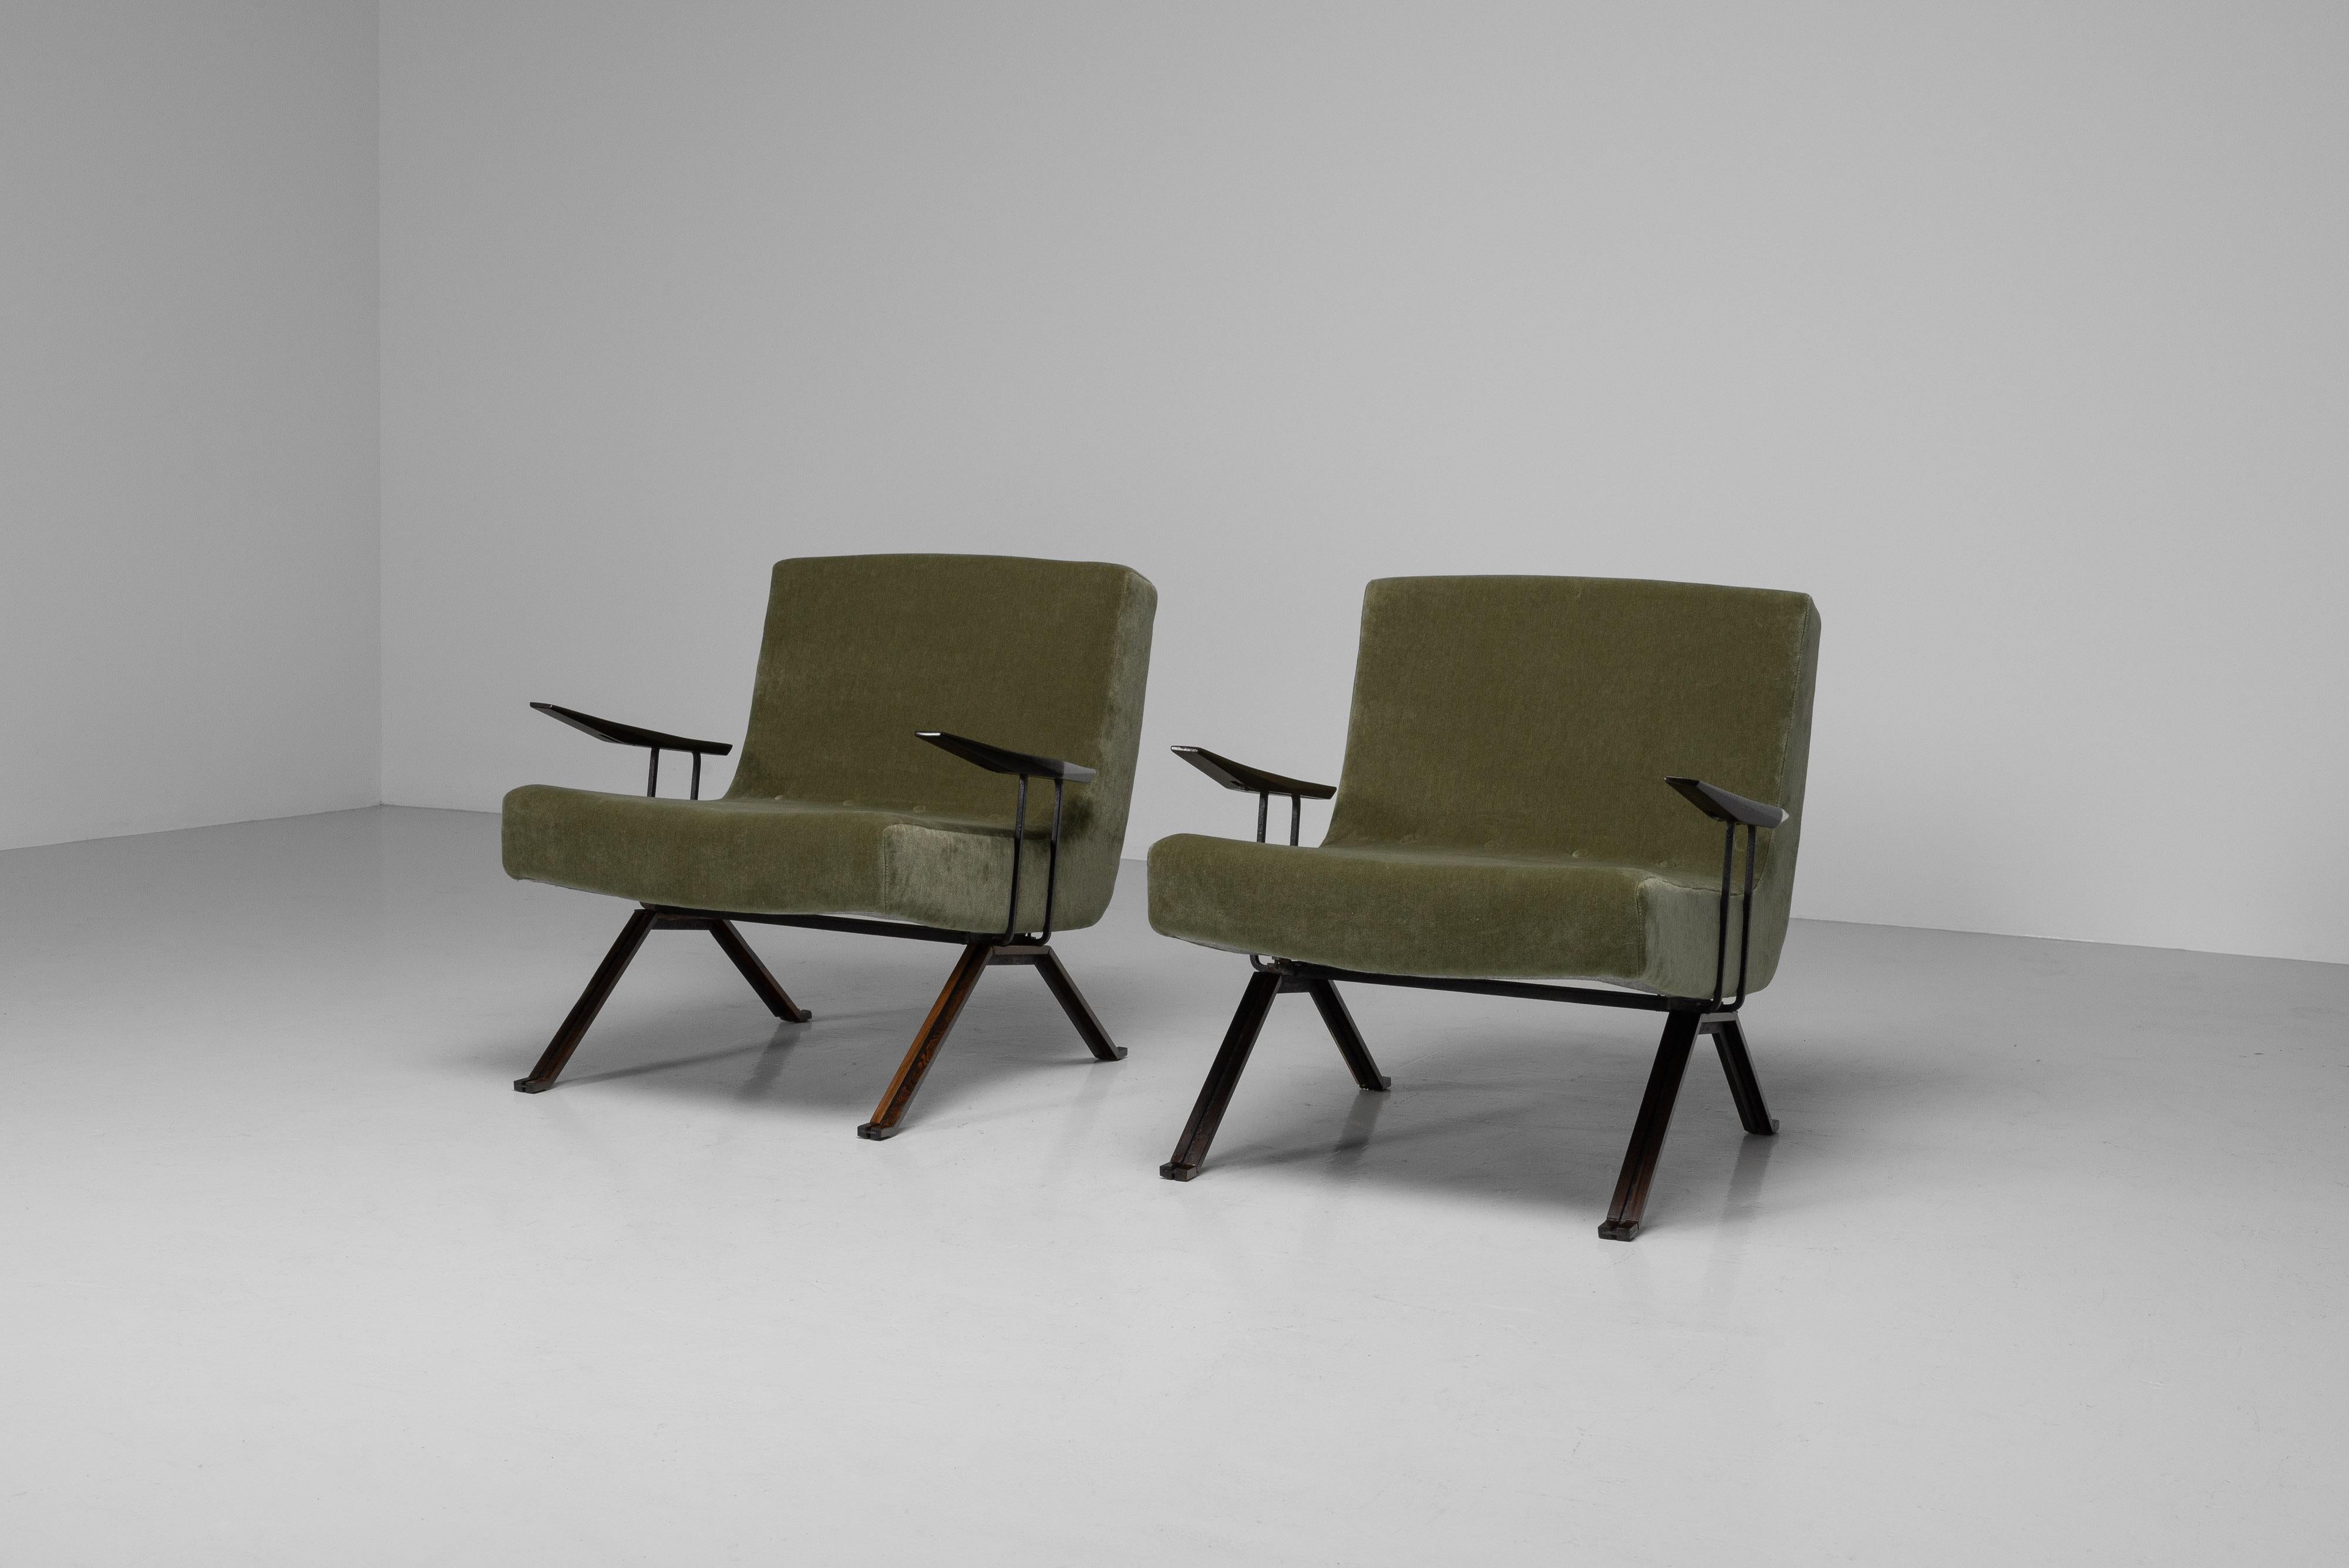 Metal Percival Lafer MP1 lounge chairs Brazil 1961 For Sale